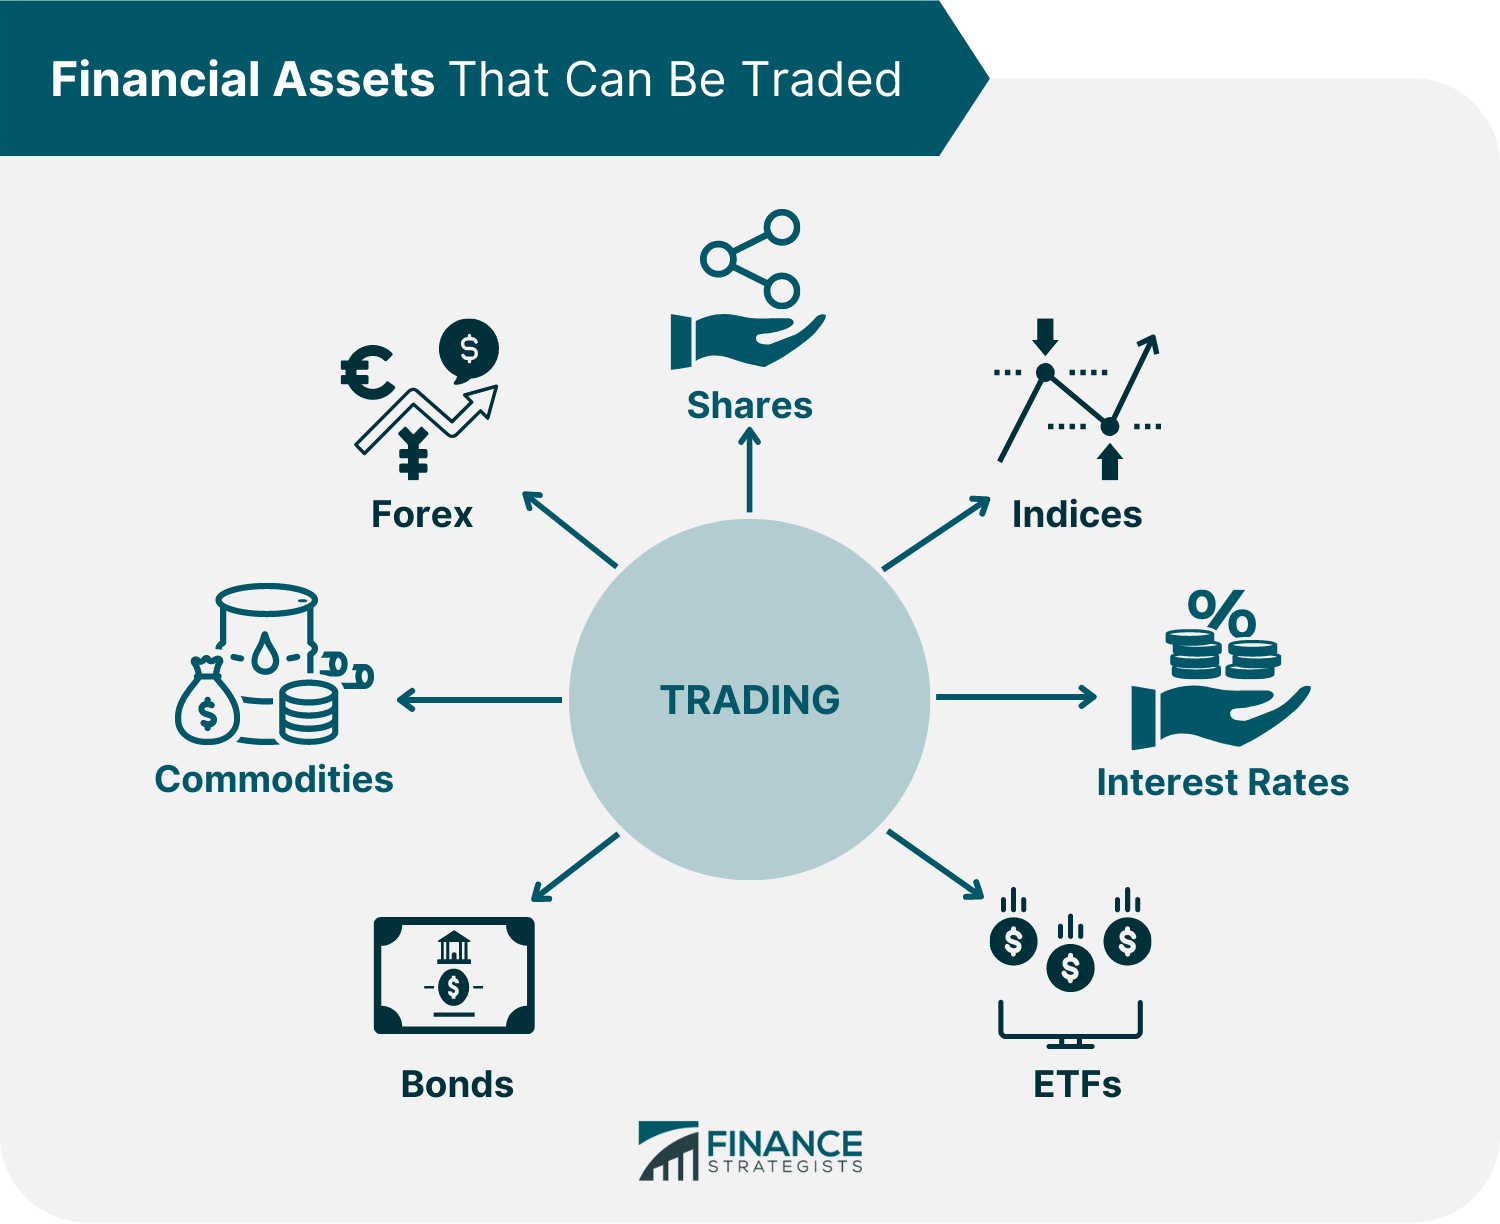 Financial Assets That Can Be Traded